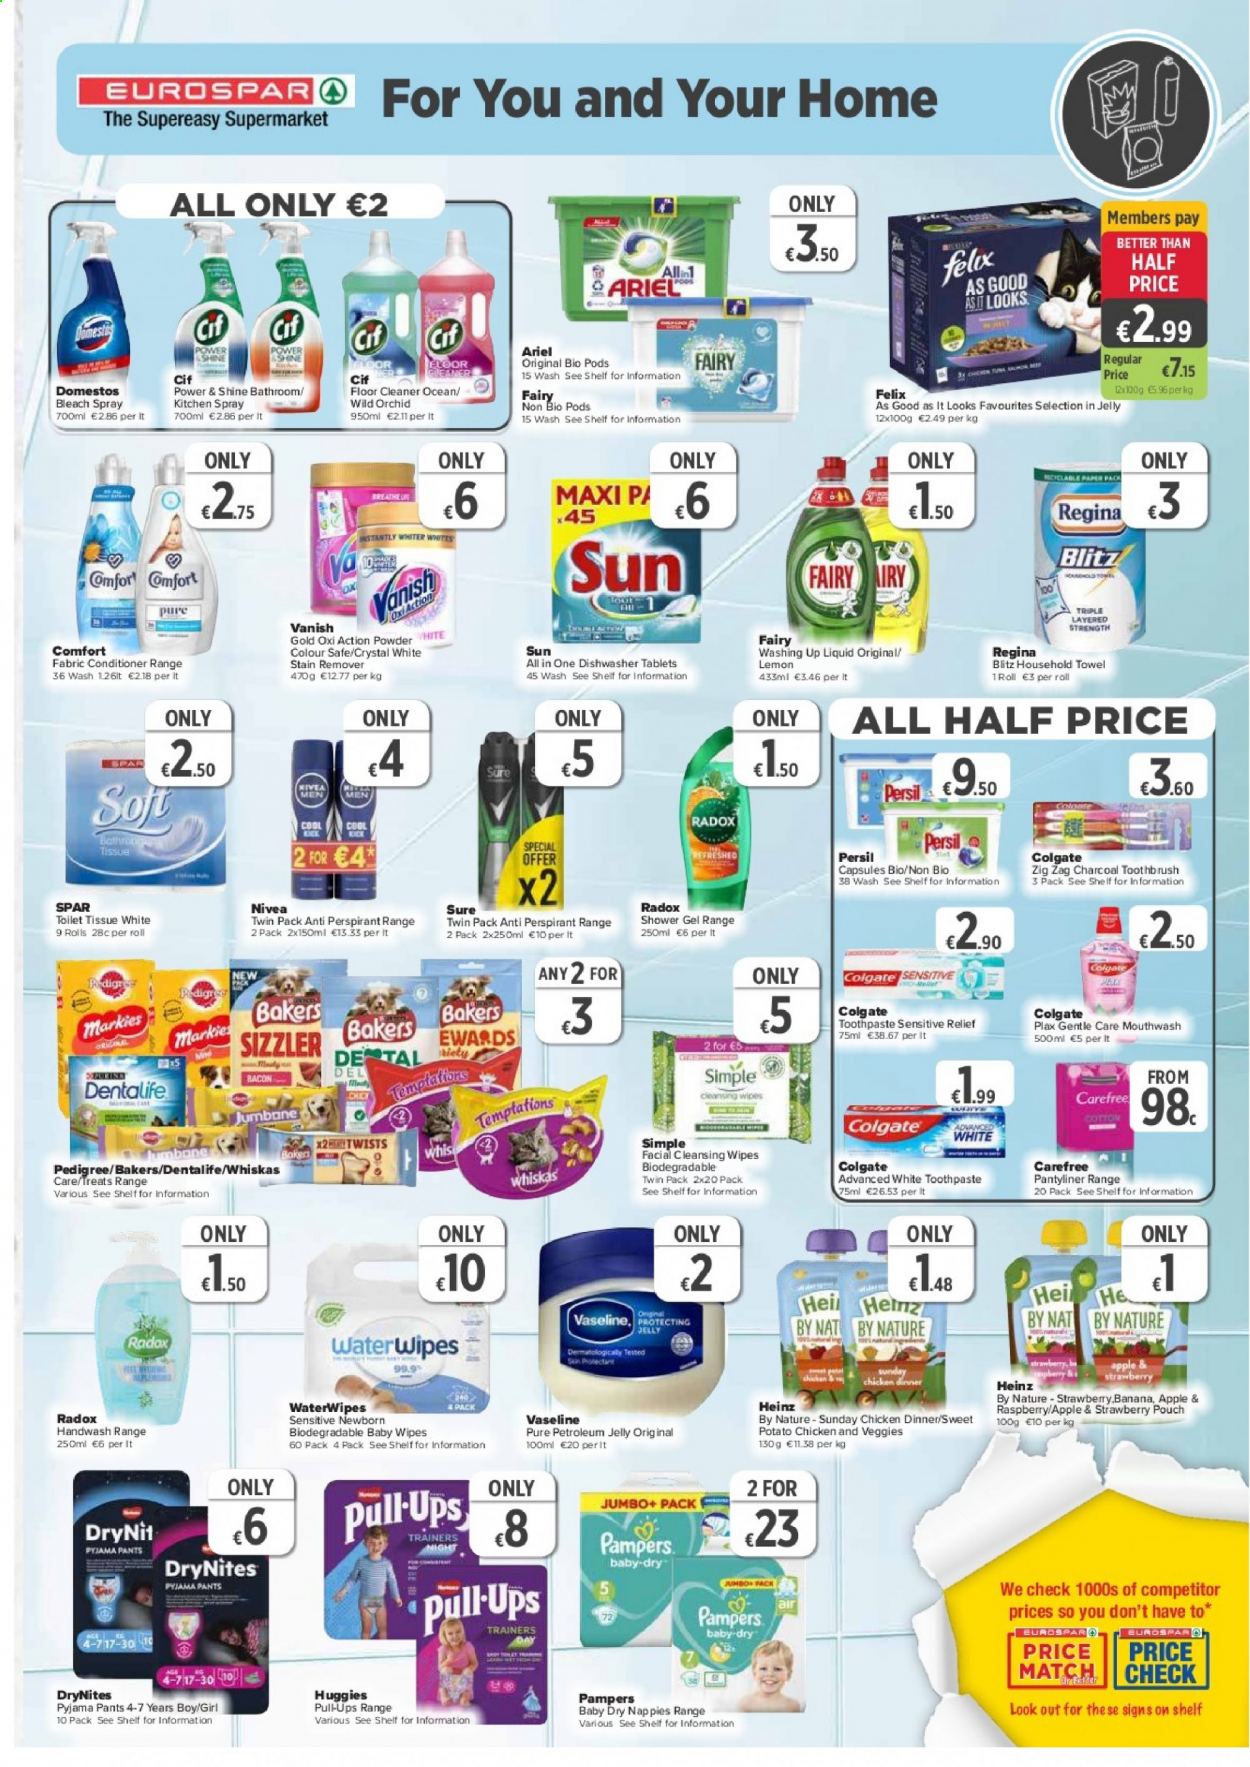 EUROSPAR offer  - 17.6.2021 - 7.7.2021 - Sales products - sweet potato, bacon, Heinz, cleansing wipes, wipes, Huggies, Pampers, pants, baby wipes, nappies, DryNites, Nivea, petroleum jelly, toilet paper, Domestos, cleaner, bleach, floor cleaner, stain remover, Fairy, Cif, Vanish, Persil, Ariel, fabric conditioner, Comfort softener, dishwashing liquid, shower gel, hand wash, Radox, Vaseline, Colgate, toothbrush, toothpaste, mouthwash, charcoal toothbrush, Plax, Carefree, Sure, towel, Whiskas, Pedigree, Felix, Bakers, Dentalife. Page 7.